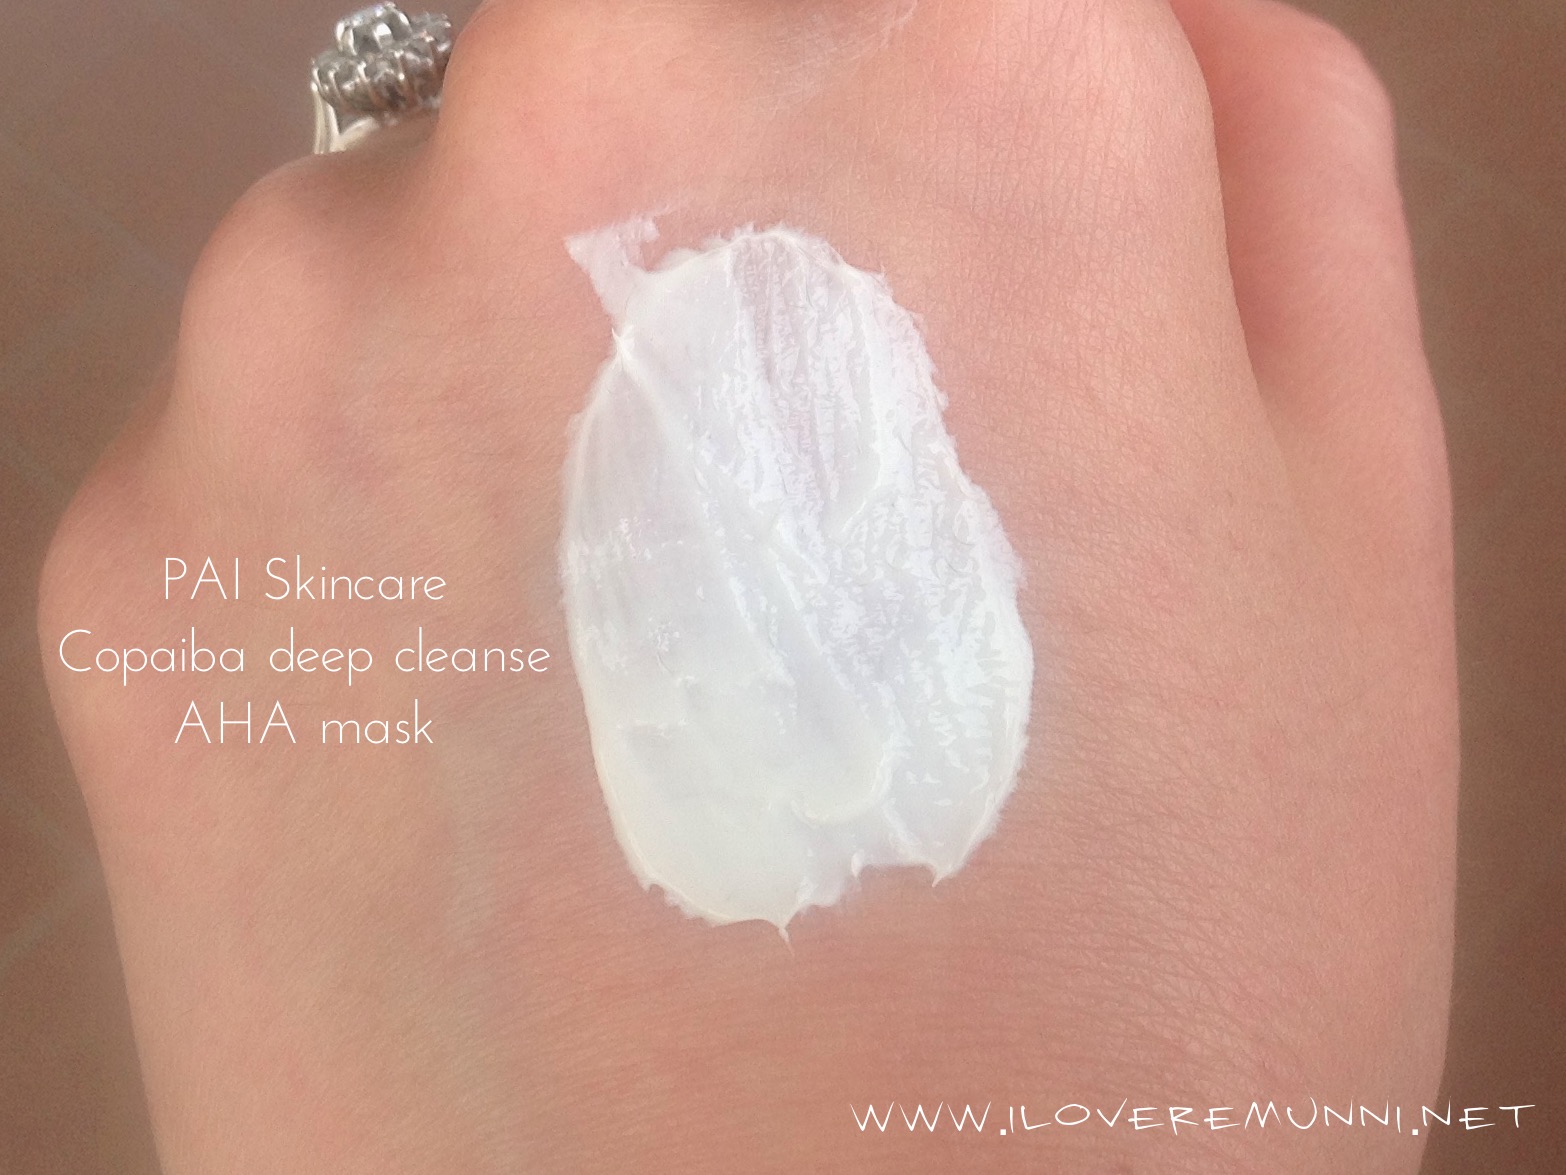 Pai-skincare-copaiba-aha-mask-opinione-recensione-inci-ingredients-review